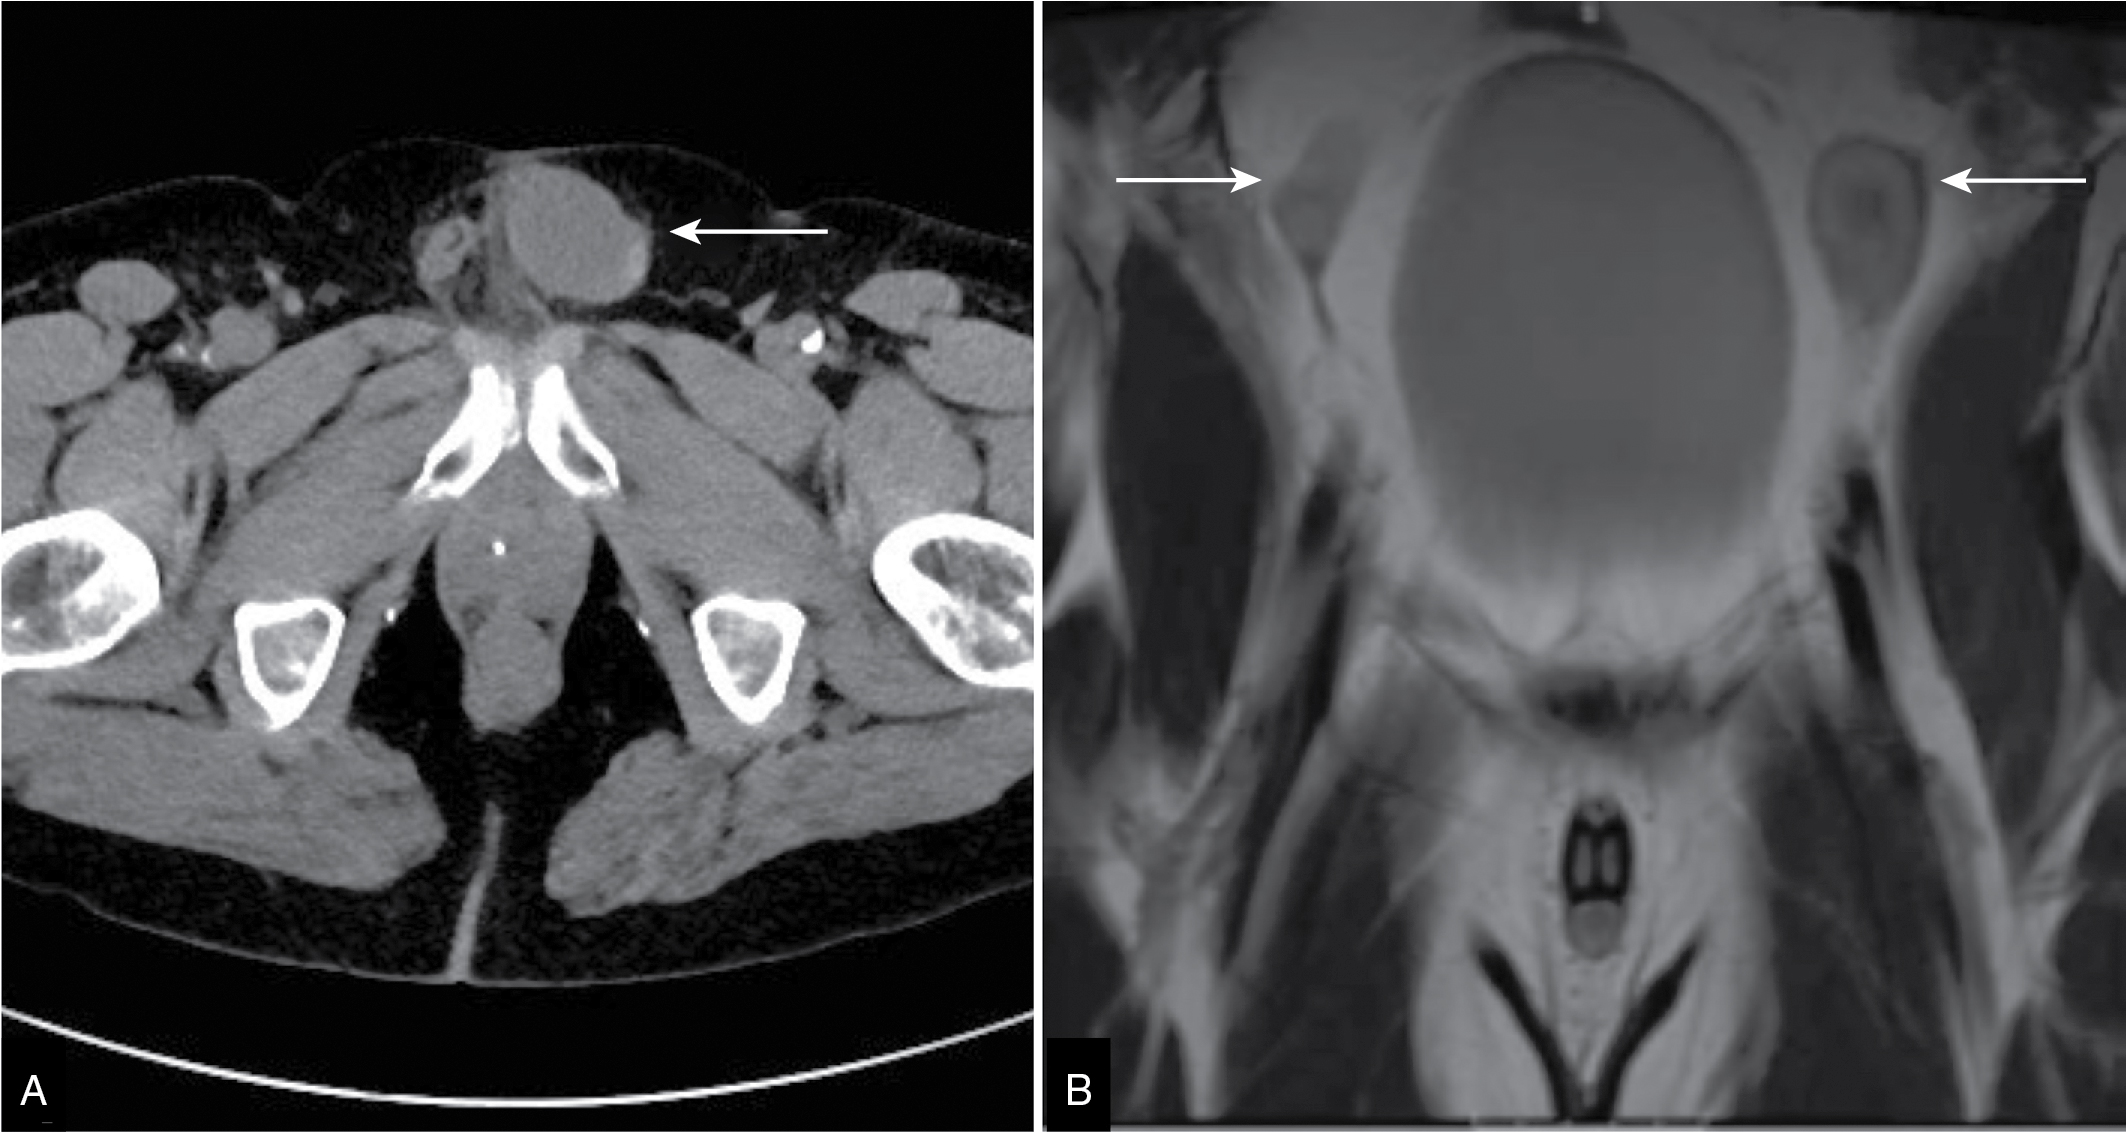 Fig. 30.3, Cryptorchidism. Axial computed tomography reveals the left testis of a 53-year-old male centered within the left inguinal canal ( A: arrow ). In another 45-year-old patient, magnetic resonance imaging shows bilateral cryptorchid testes; the two testes are located within the abdominal cavity ( B: arrows ).